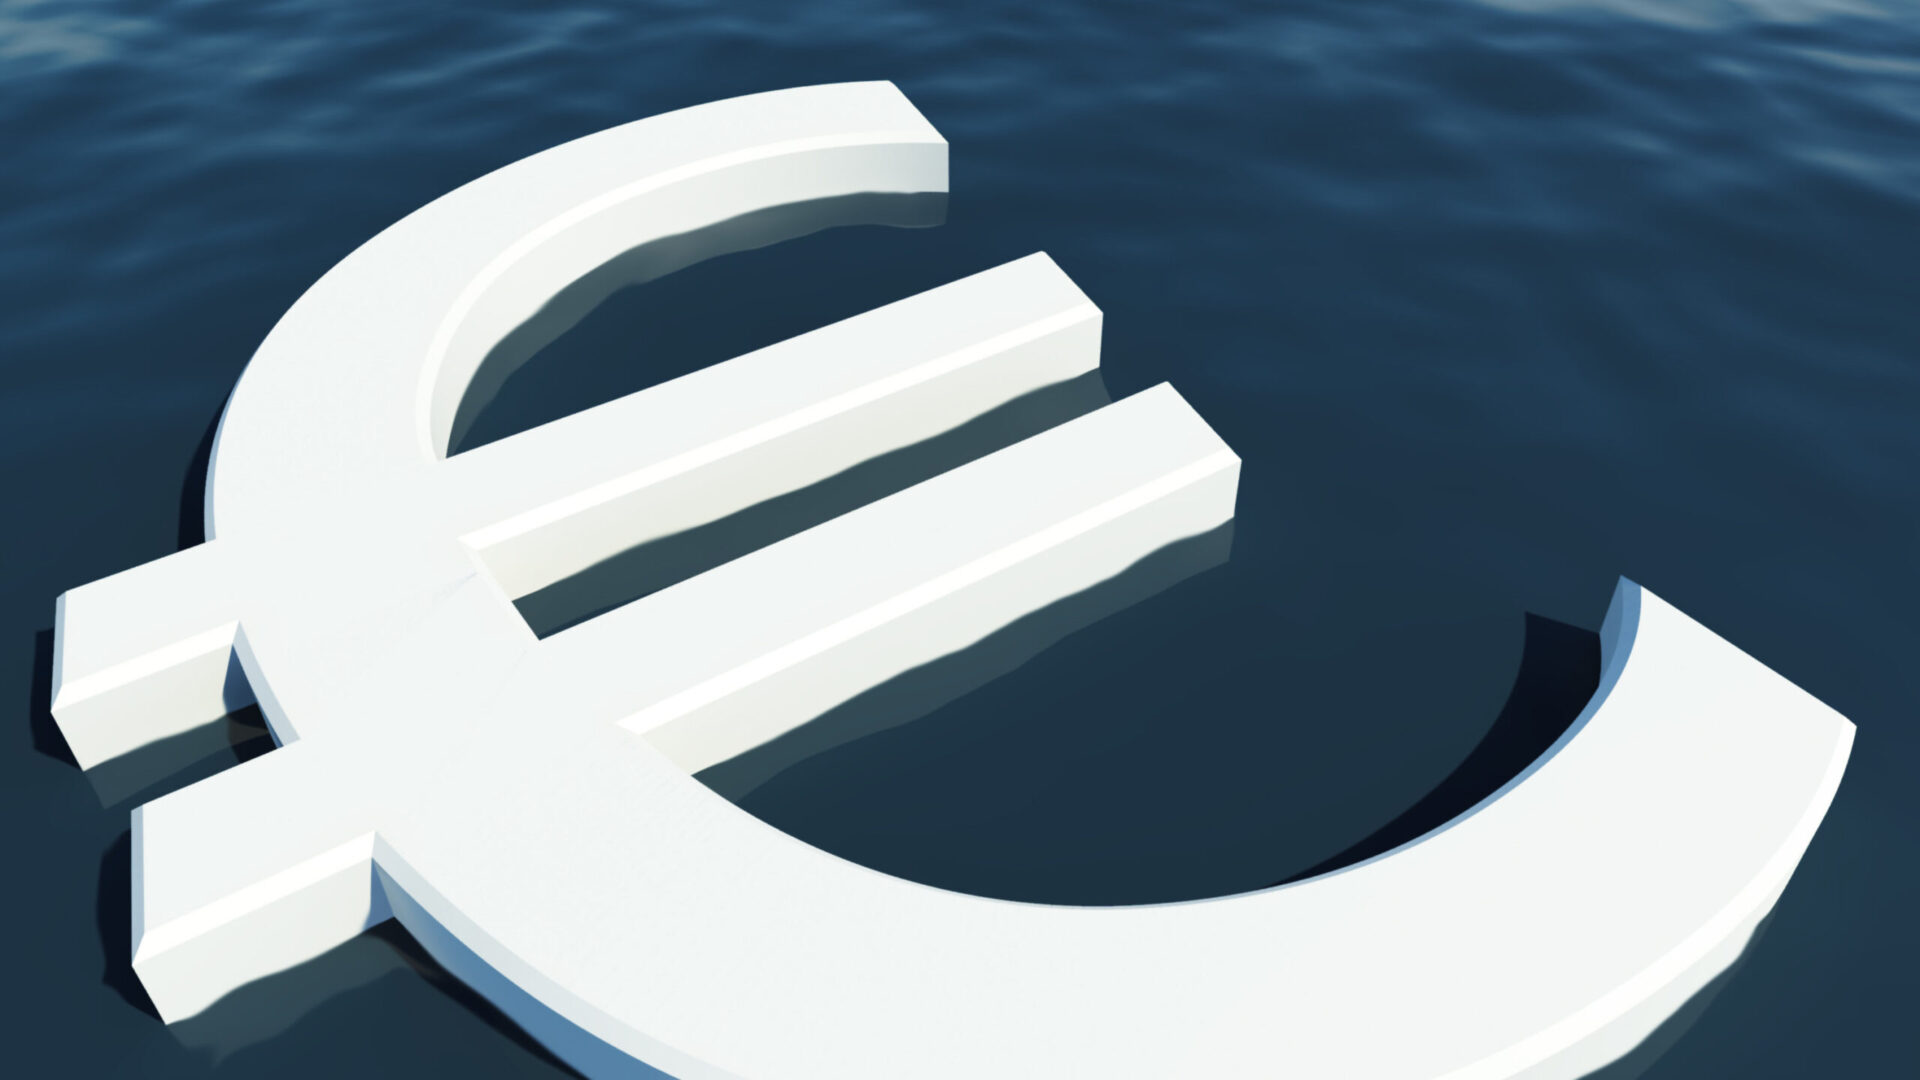 Euro Floating Showing Money Wealth Or Earning